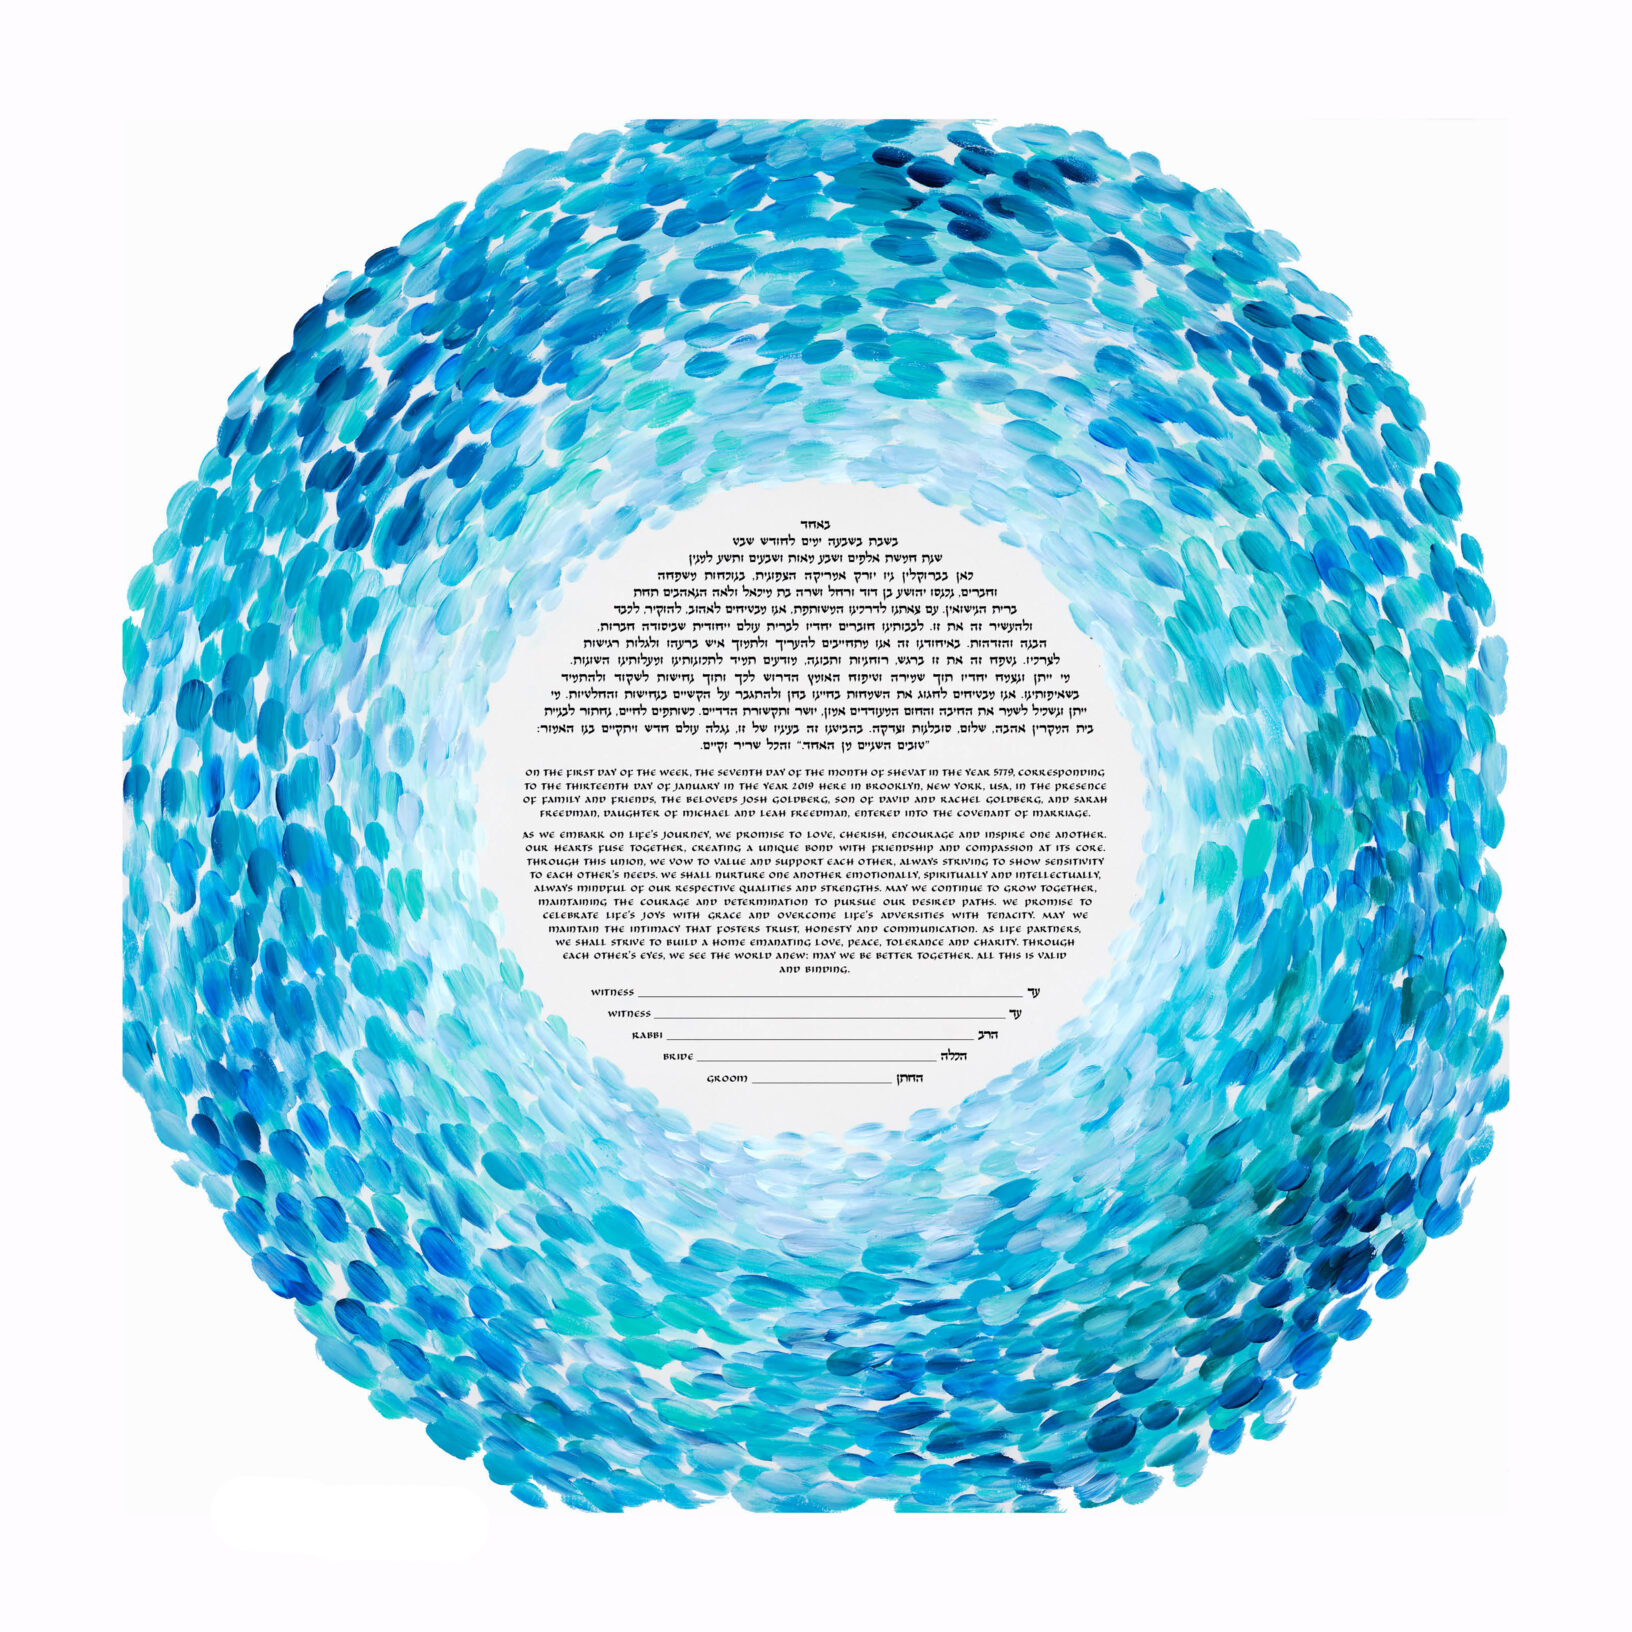 Natalie Cherie Giclee I Love You With all the Shades of Blue Blue Ketubah Art